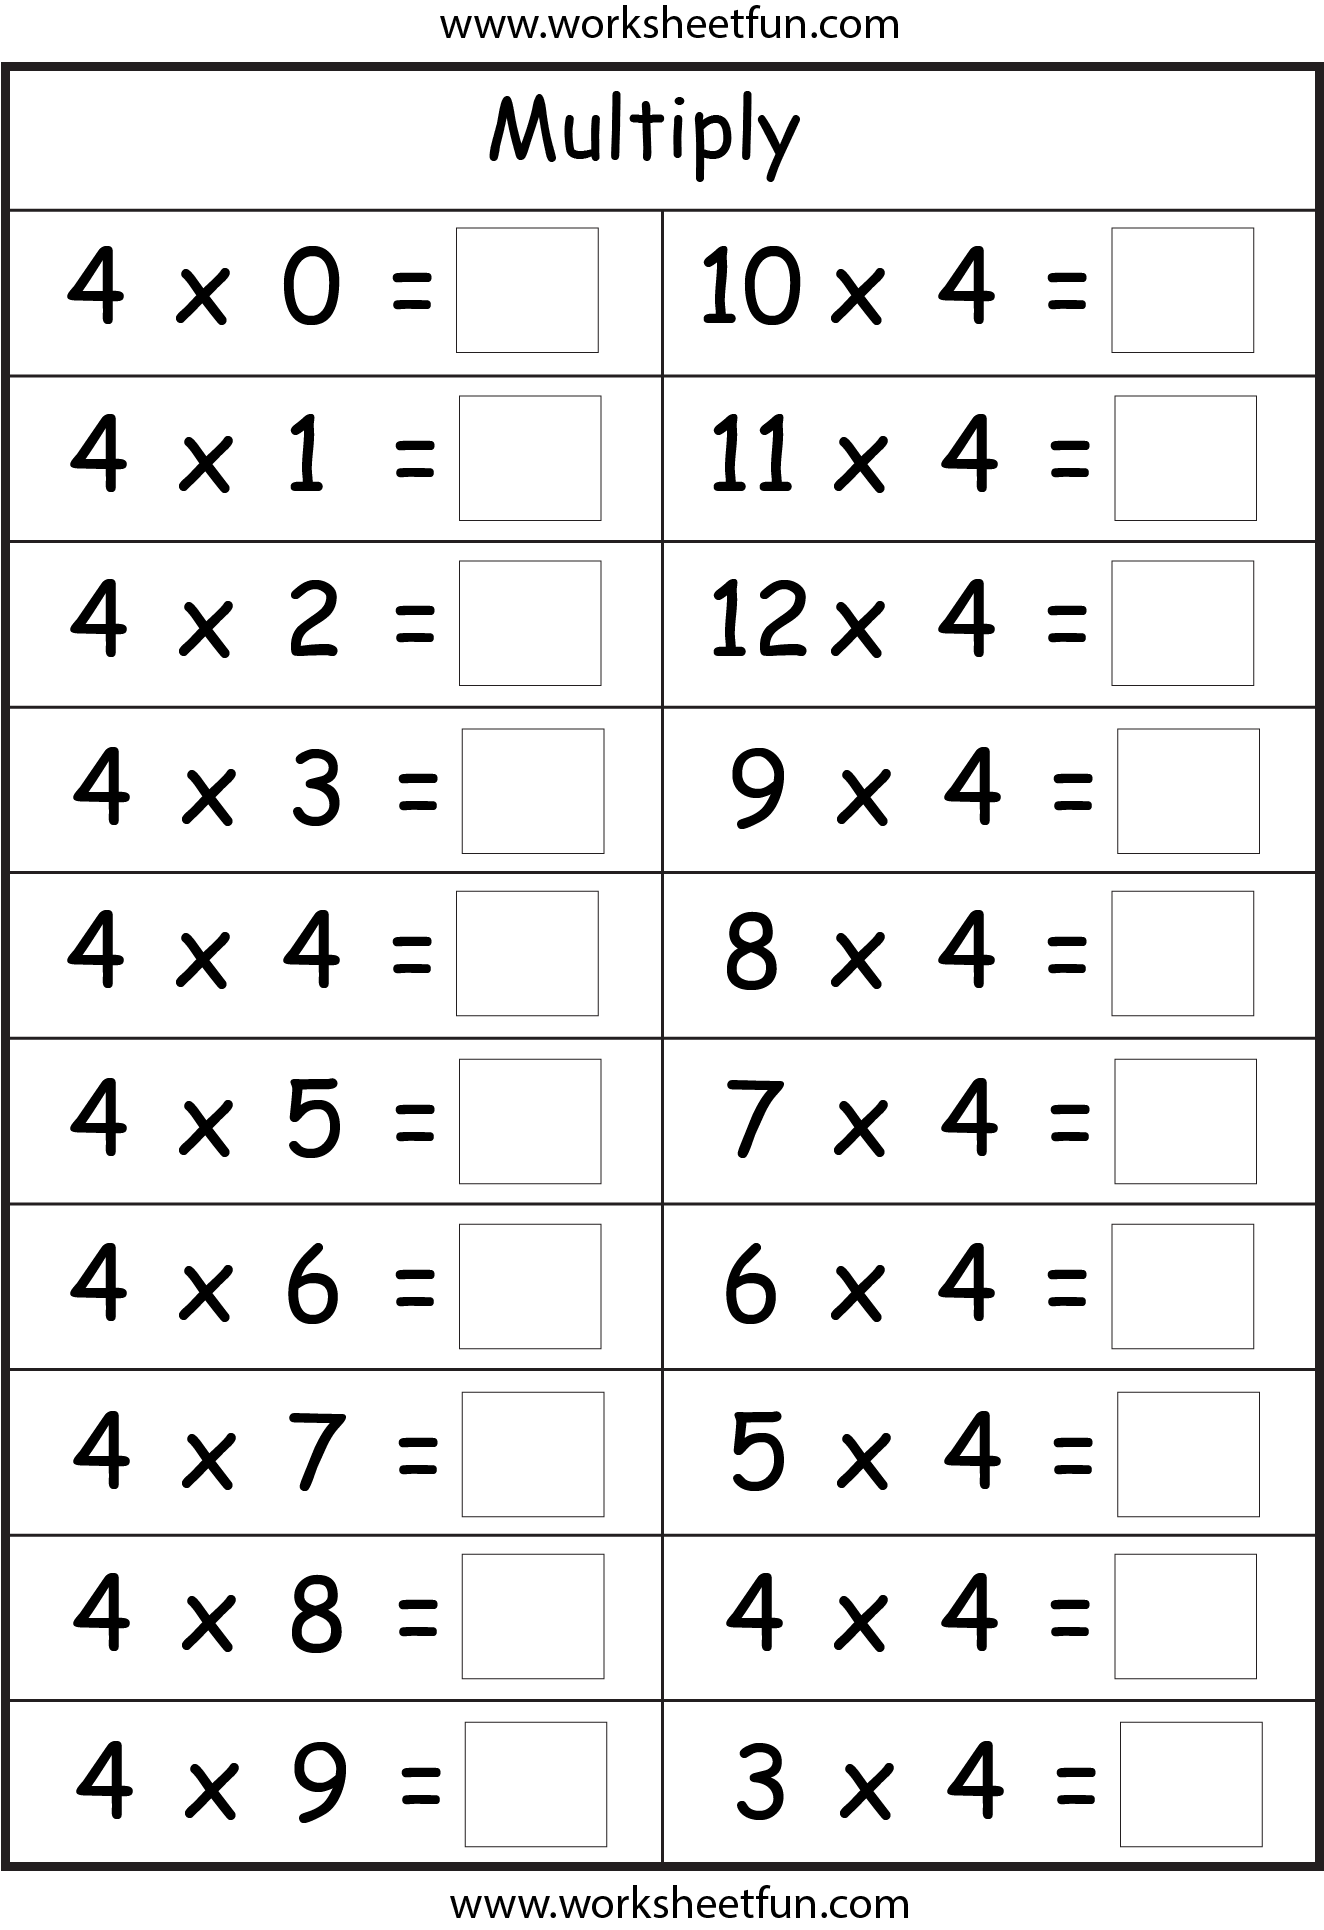 Multiplication Facts Worksheets By Numbers